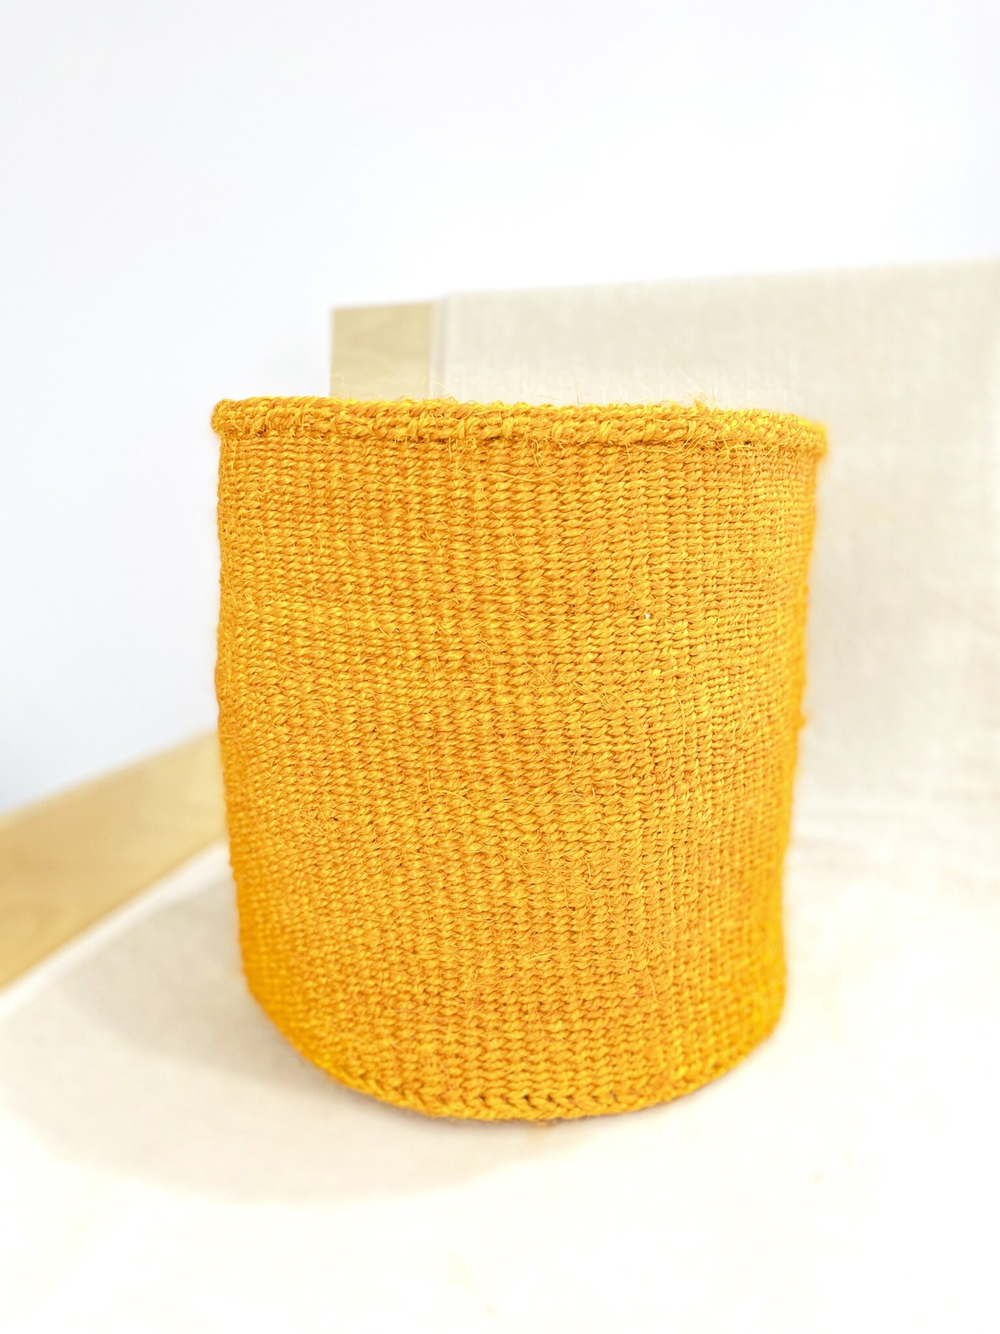 A bold yellow basket handmade in Kenya pictured against a white background